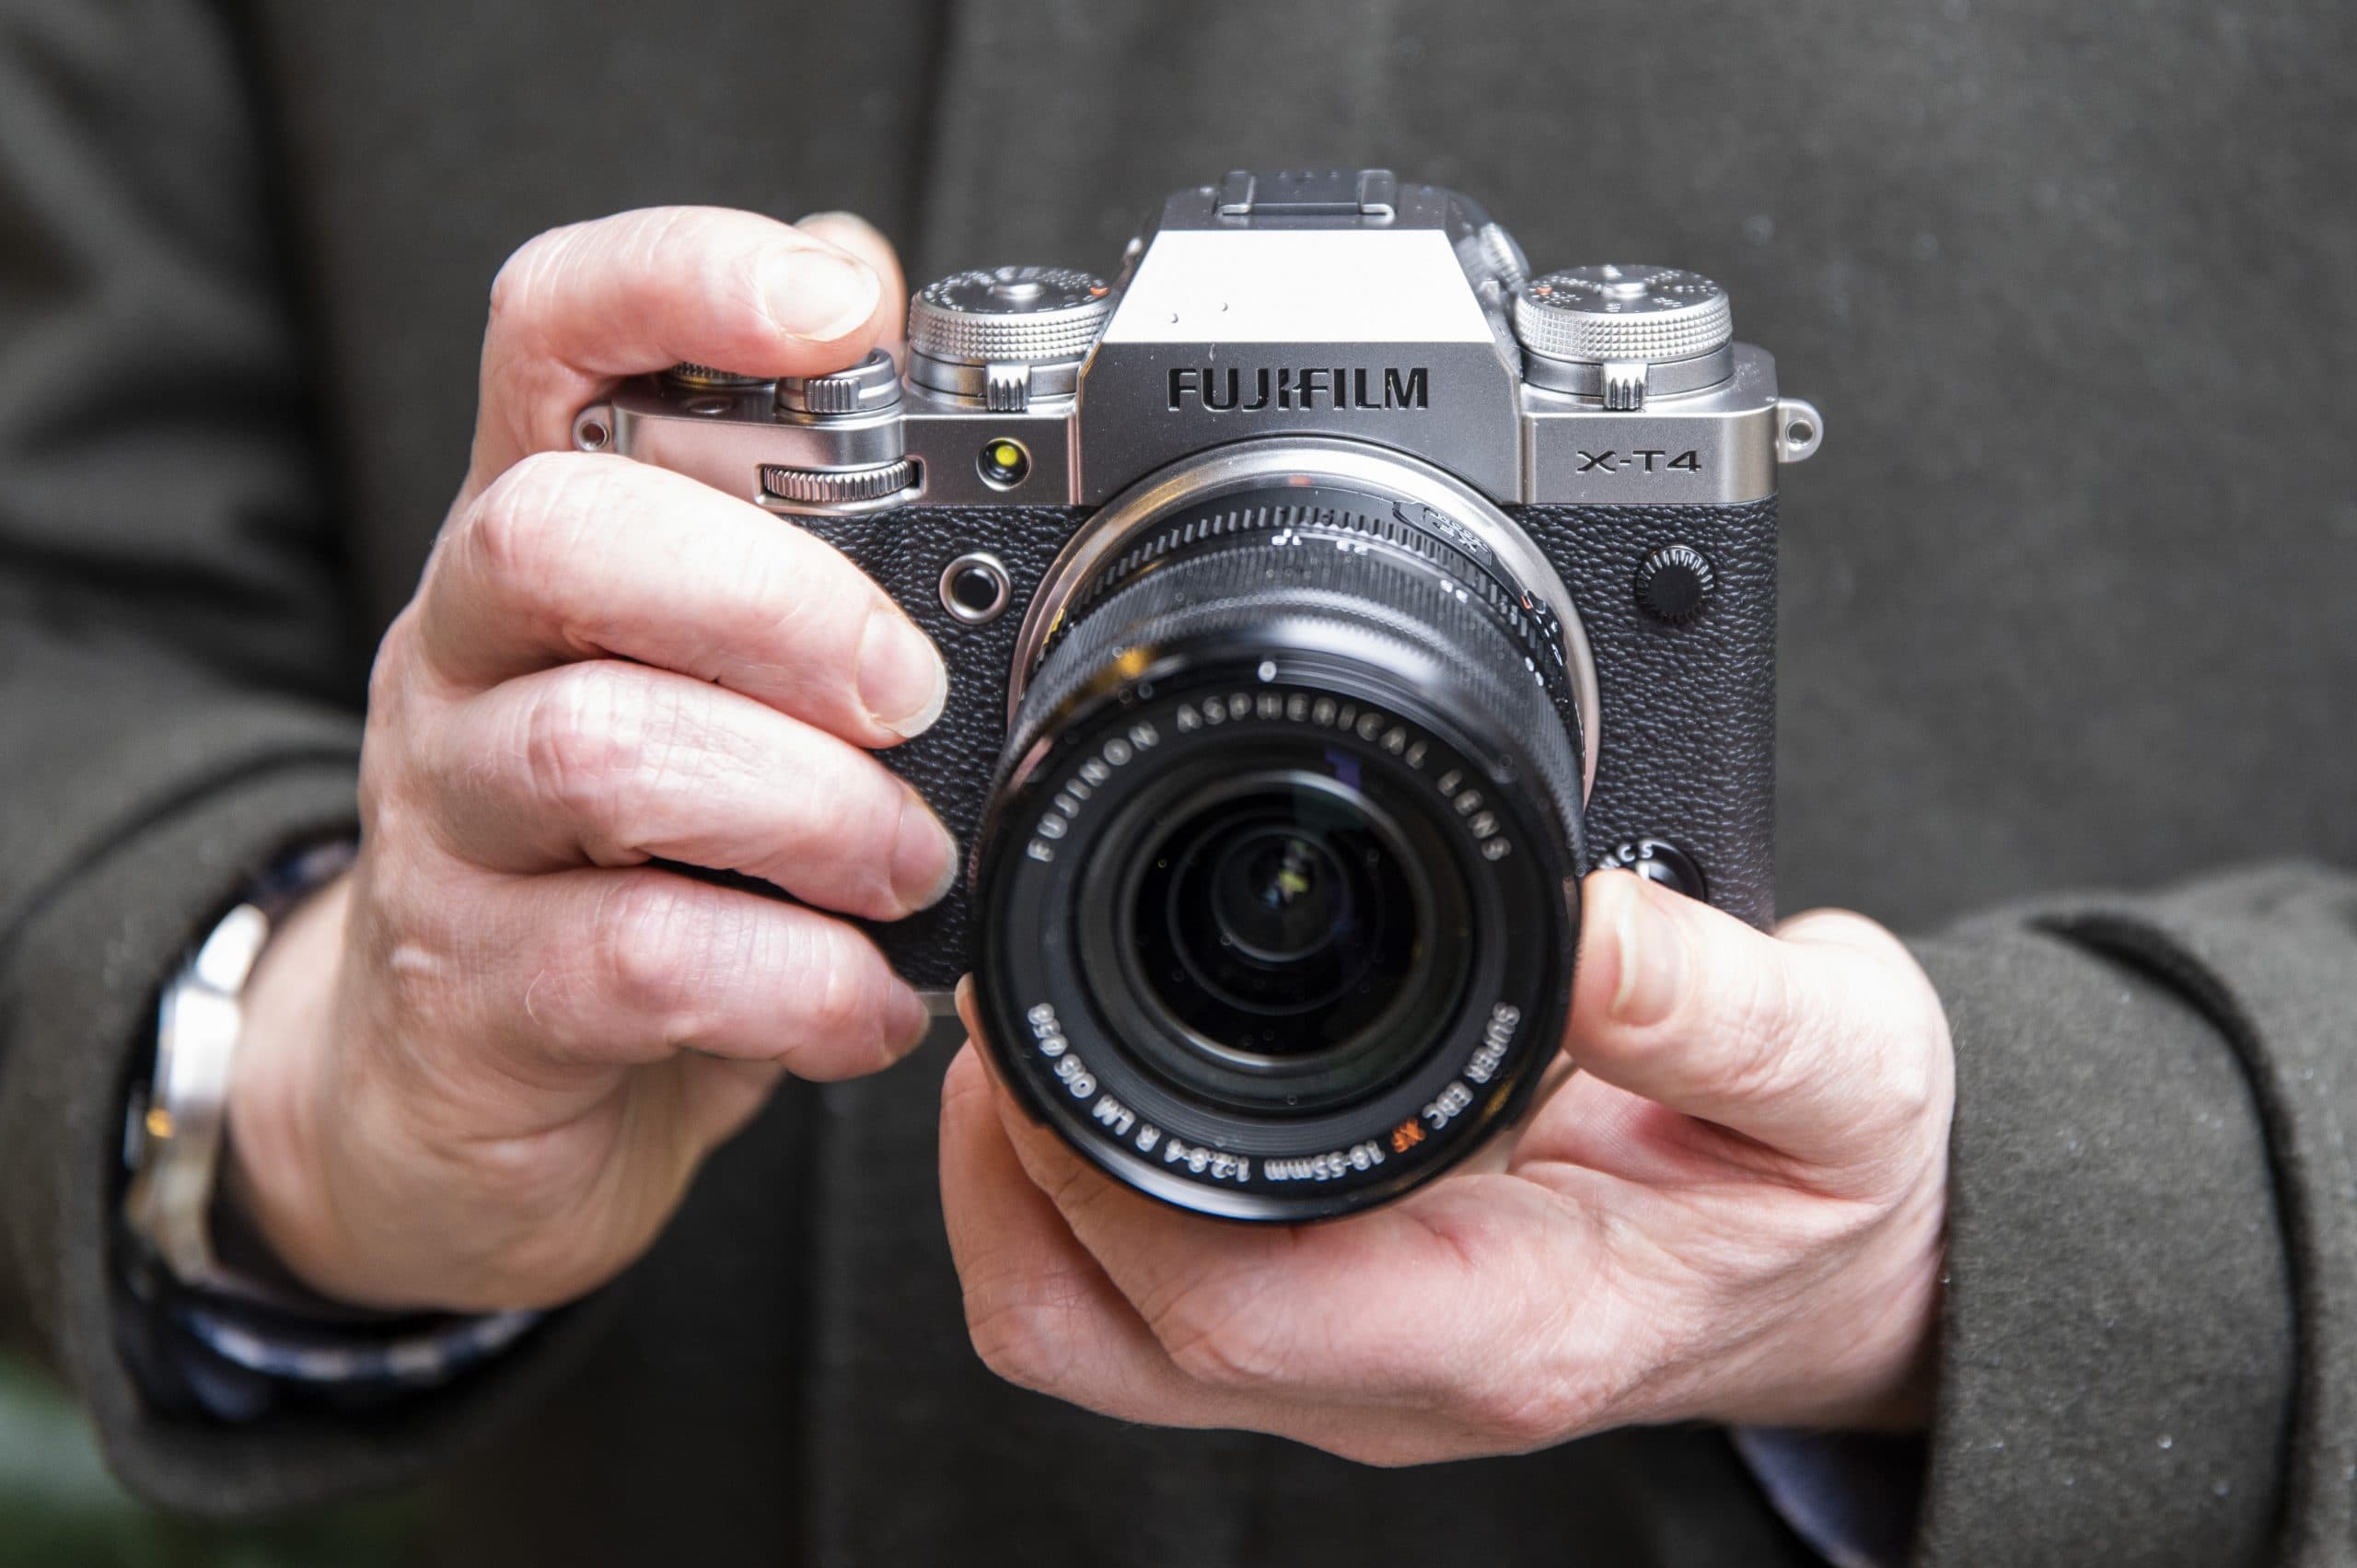 Fujifilm X-T4 review: Digital Photography Review